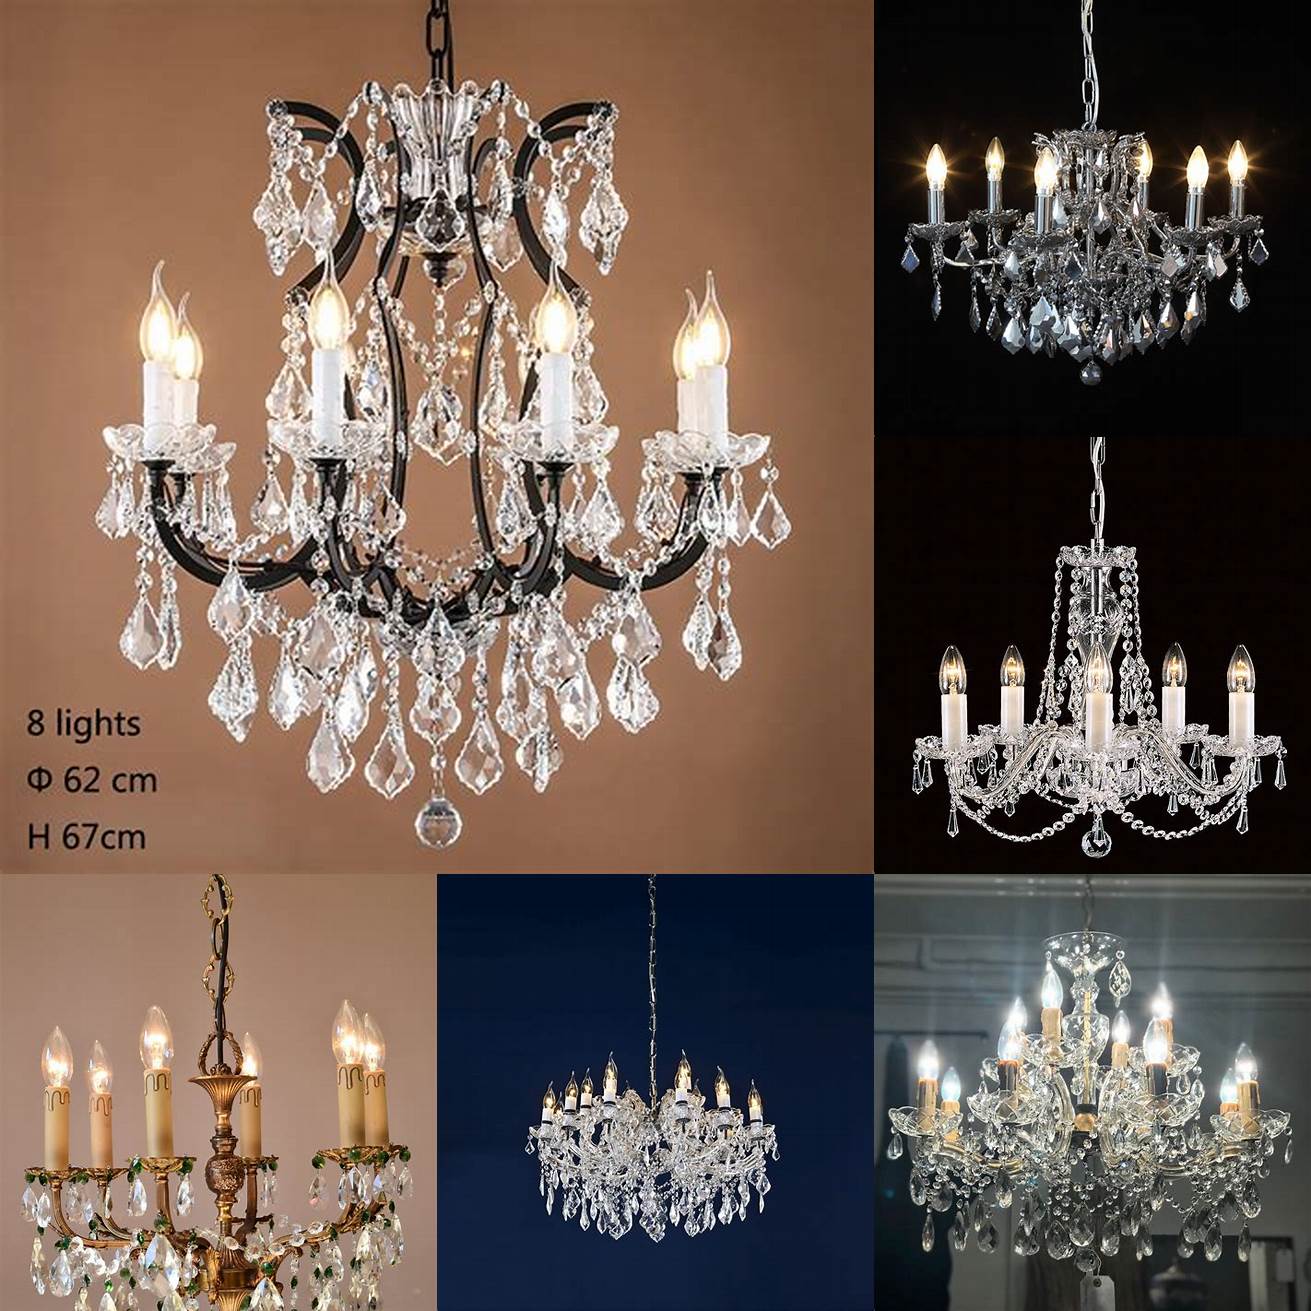 French style chandelier with crystal droplets